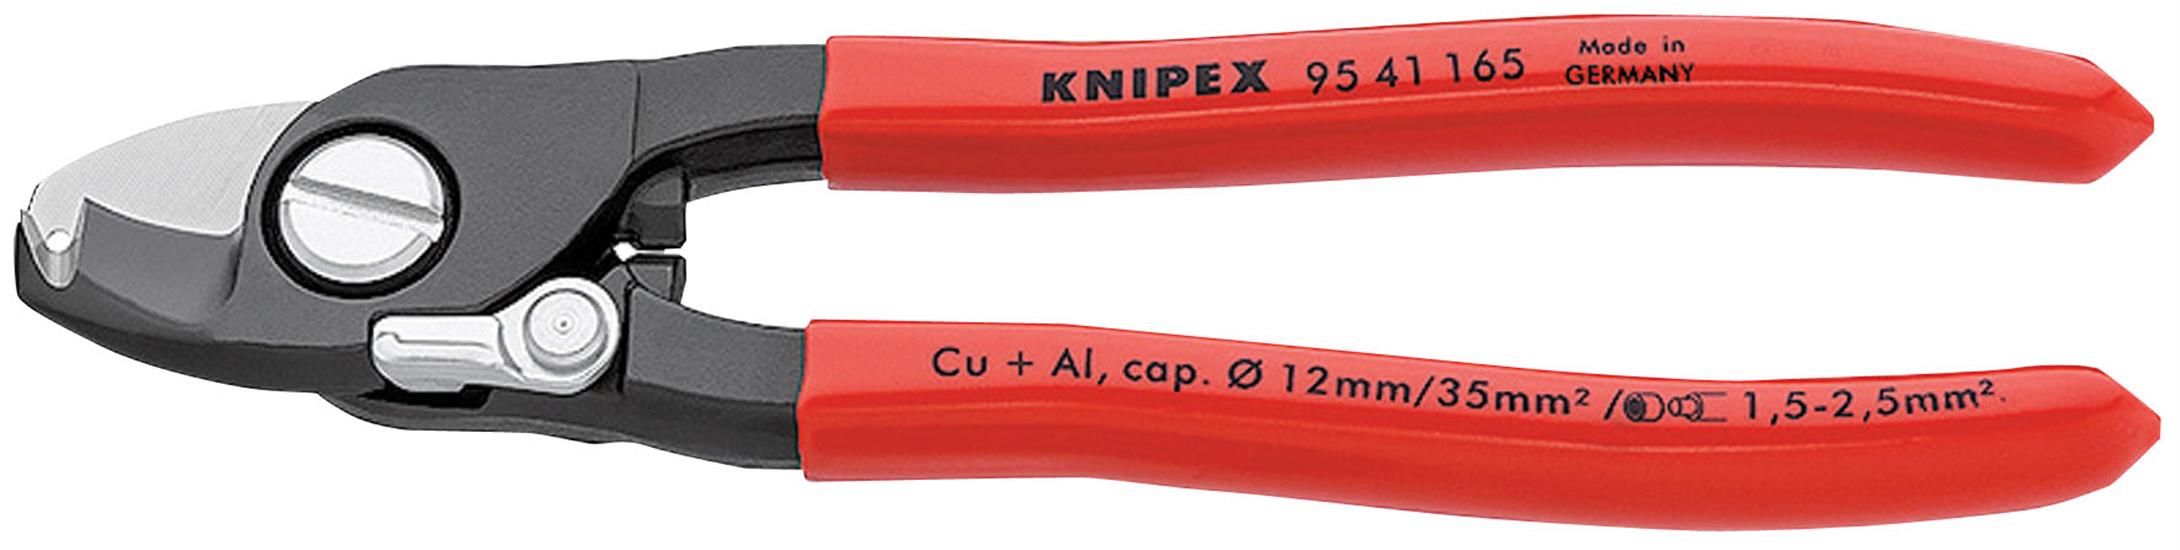 Draper 82576 ⢕ 41 165) - Knipex 95 41 165SBE Copper or Aluminium Only Cable Shear with Sprung Handles, 165mm